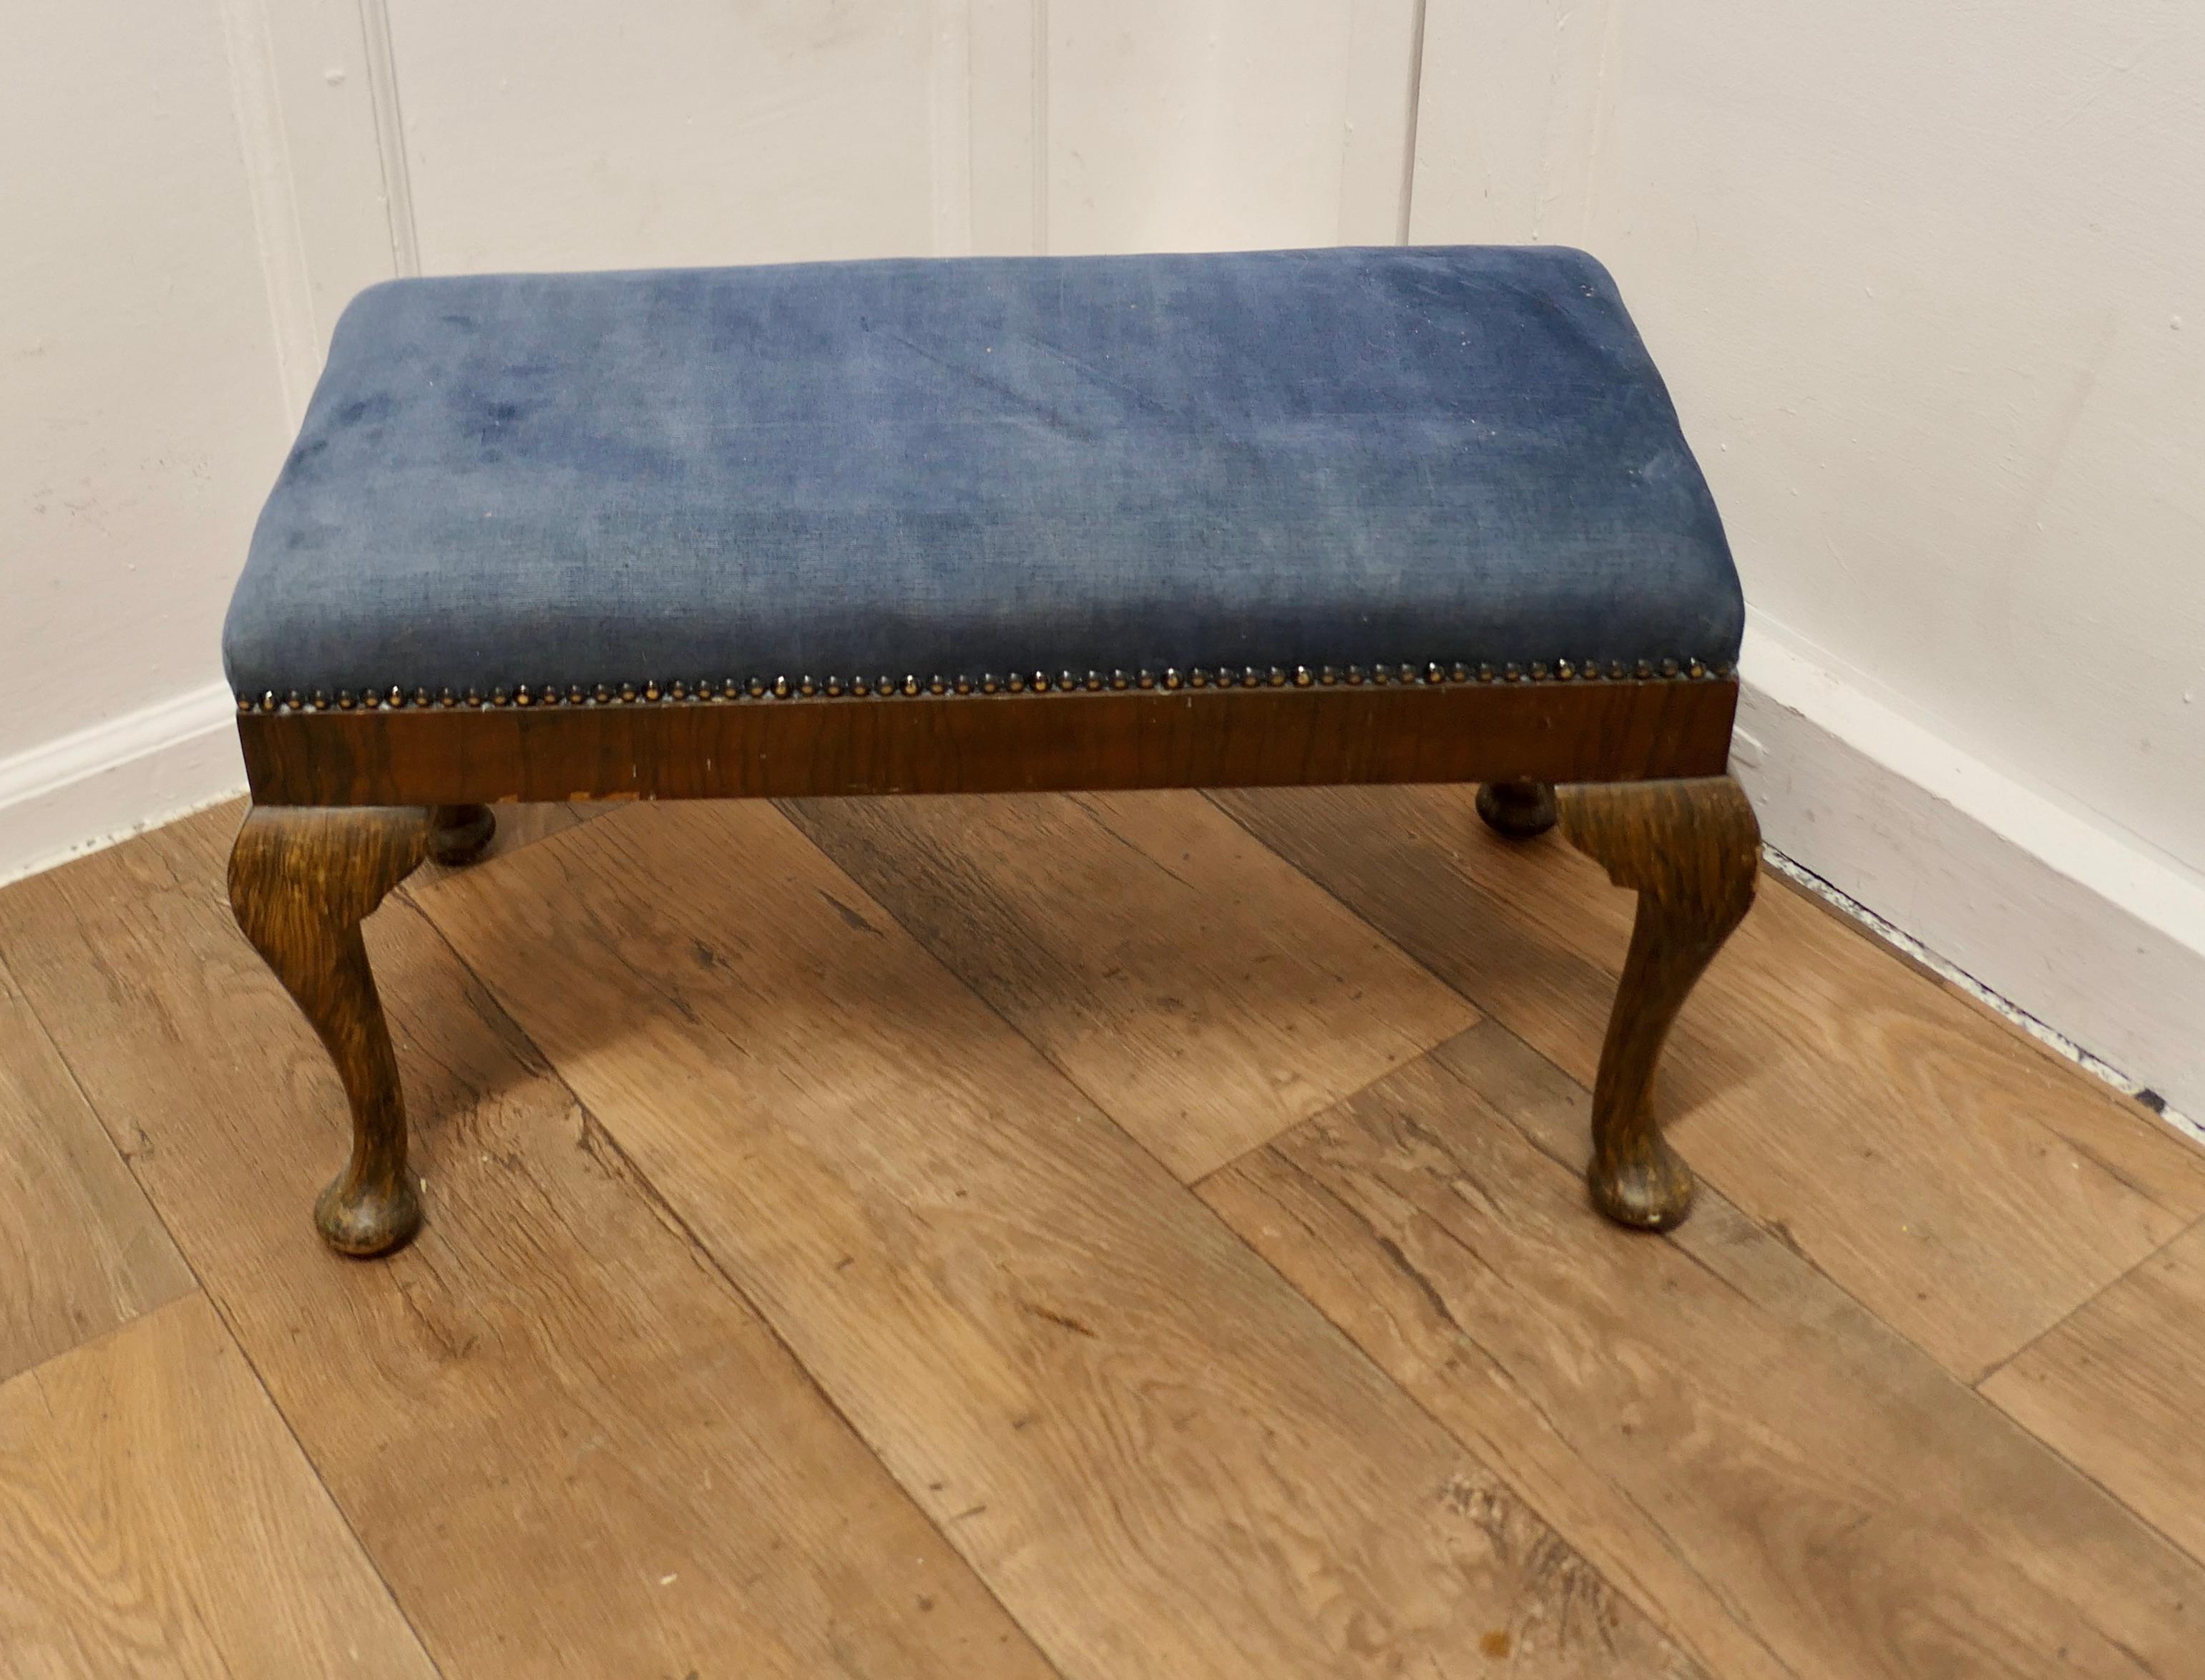 Cabriole Leg Velvet Window Stool  

This is a good Sturdy Stool it has strong cabriole legs 
The stool is newly upholstered in dusty blue needle cord, studded around the edges
This sturdy Stool would work well in almost any room as either a stool or